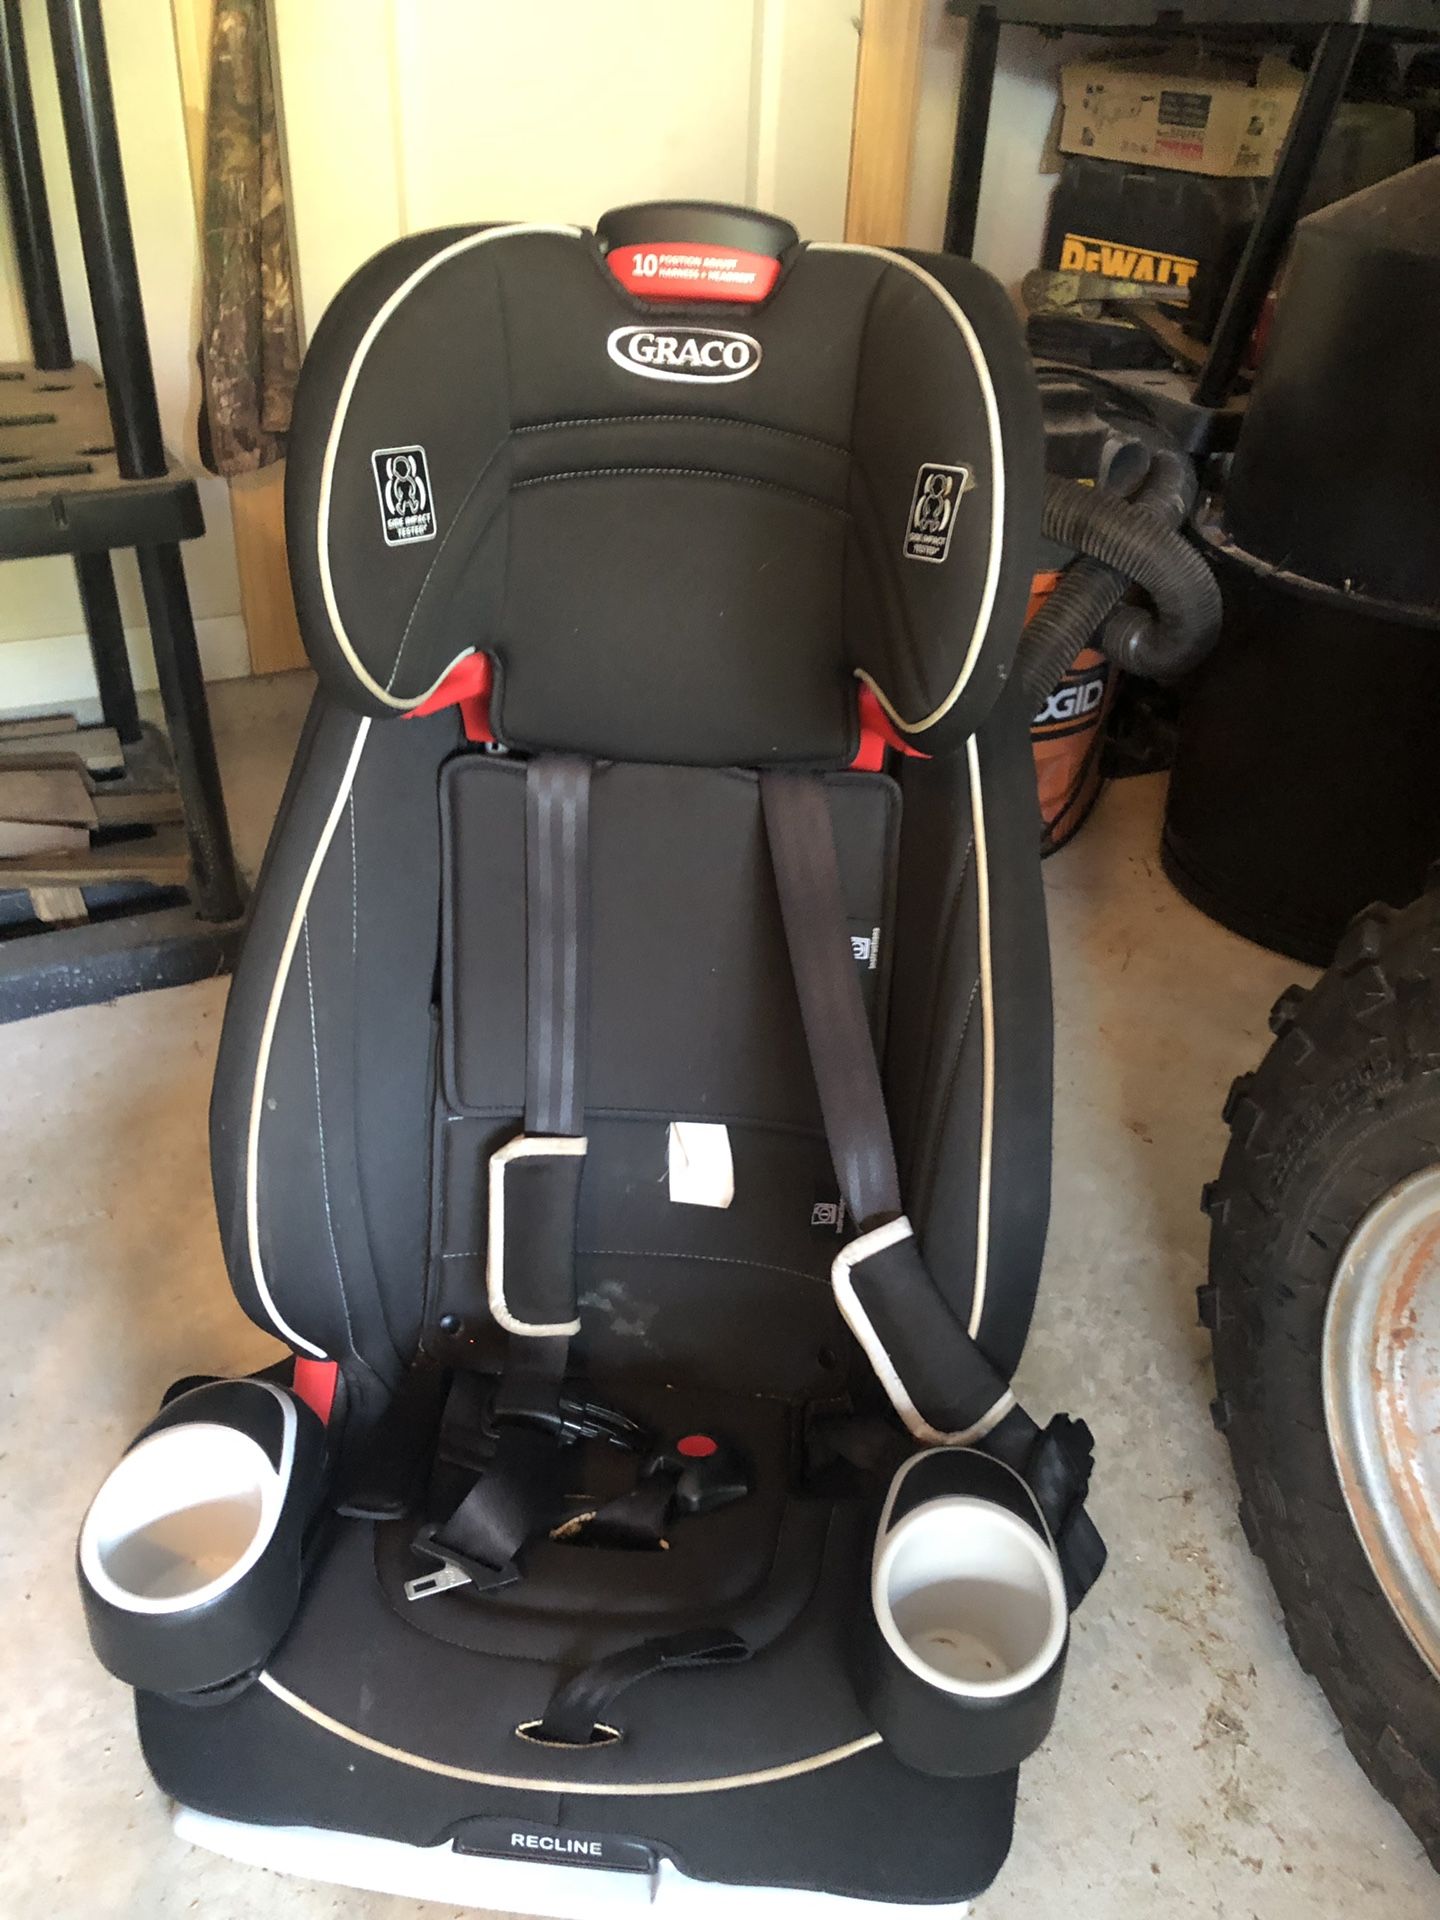 Graco 3 in 1 booster seat LIKE NEW $60 obo